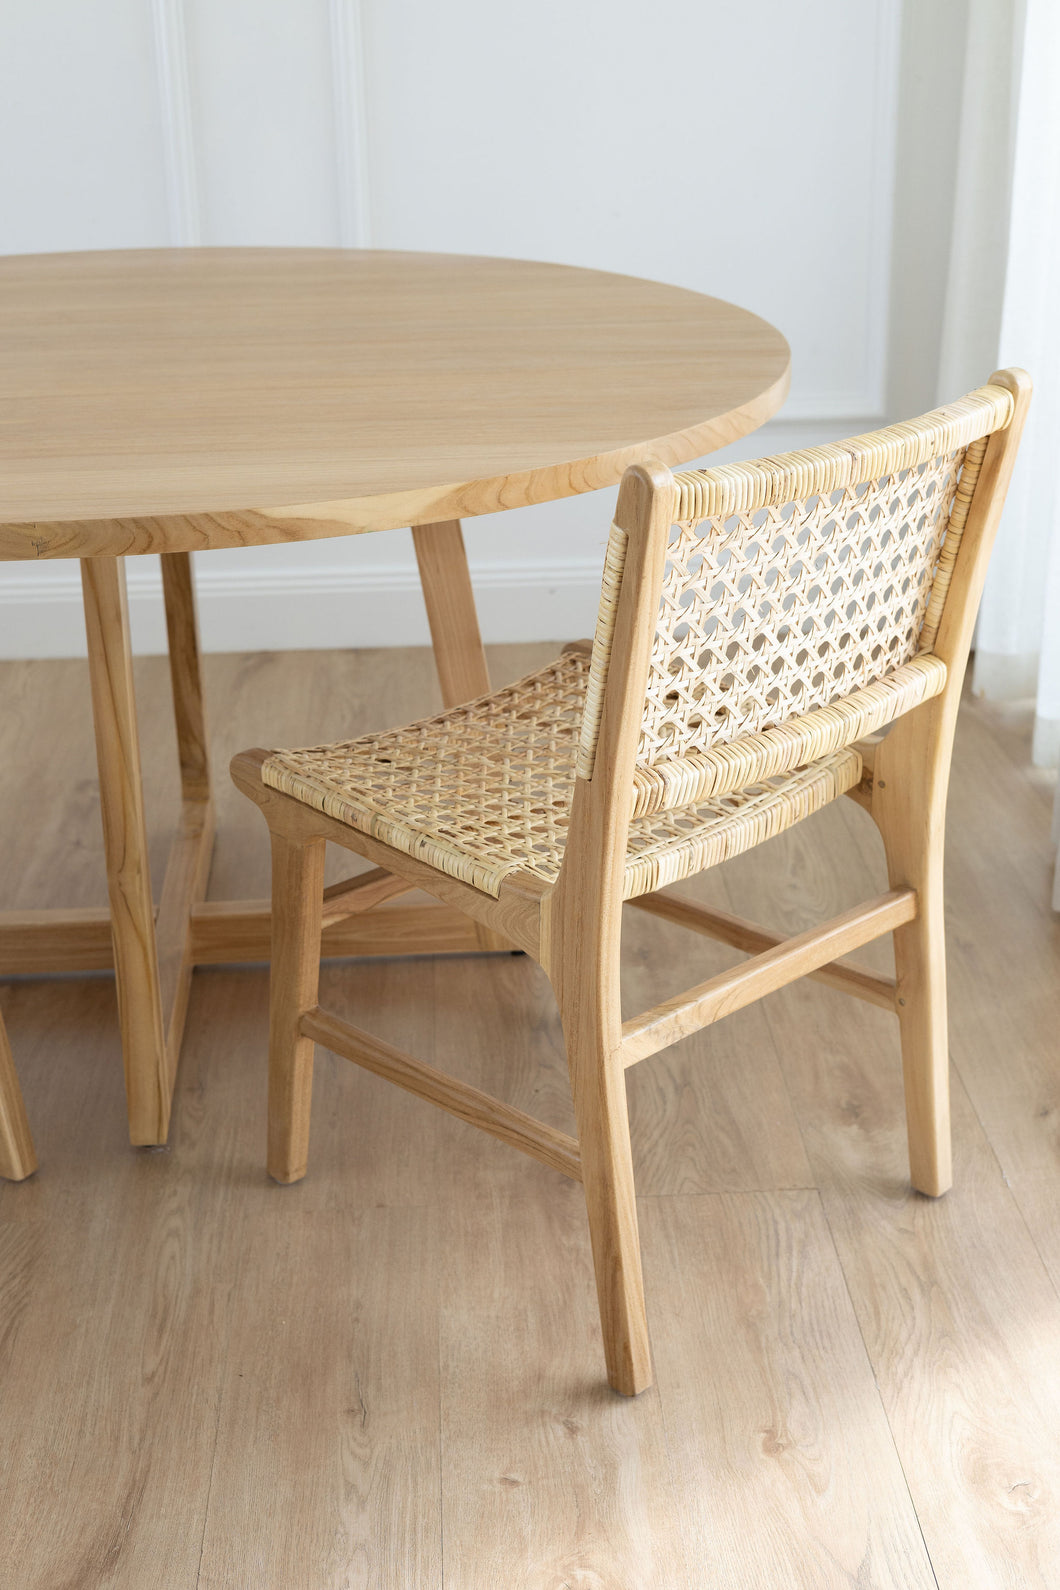 The Amira dining chair